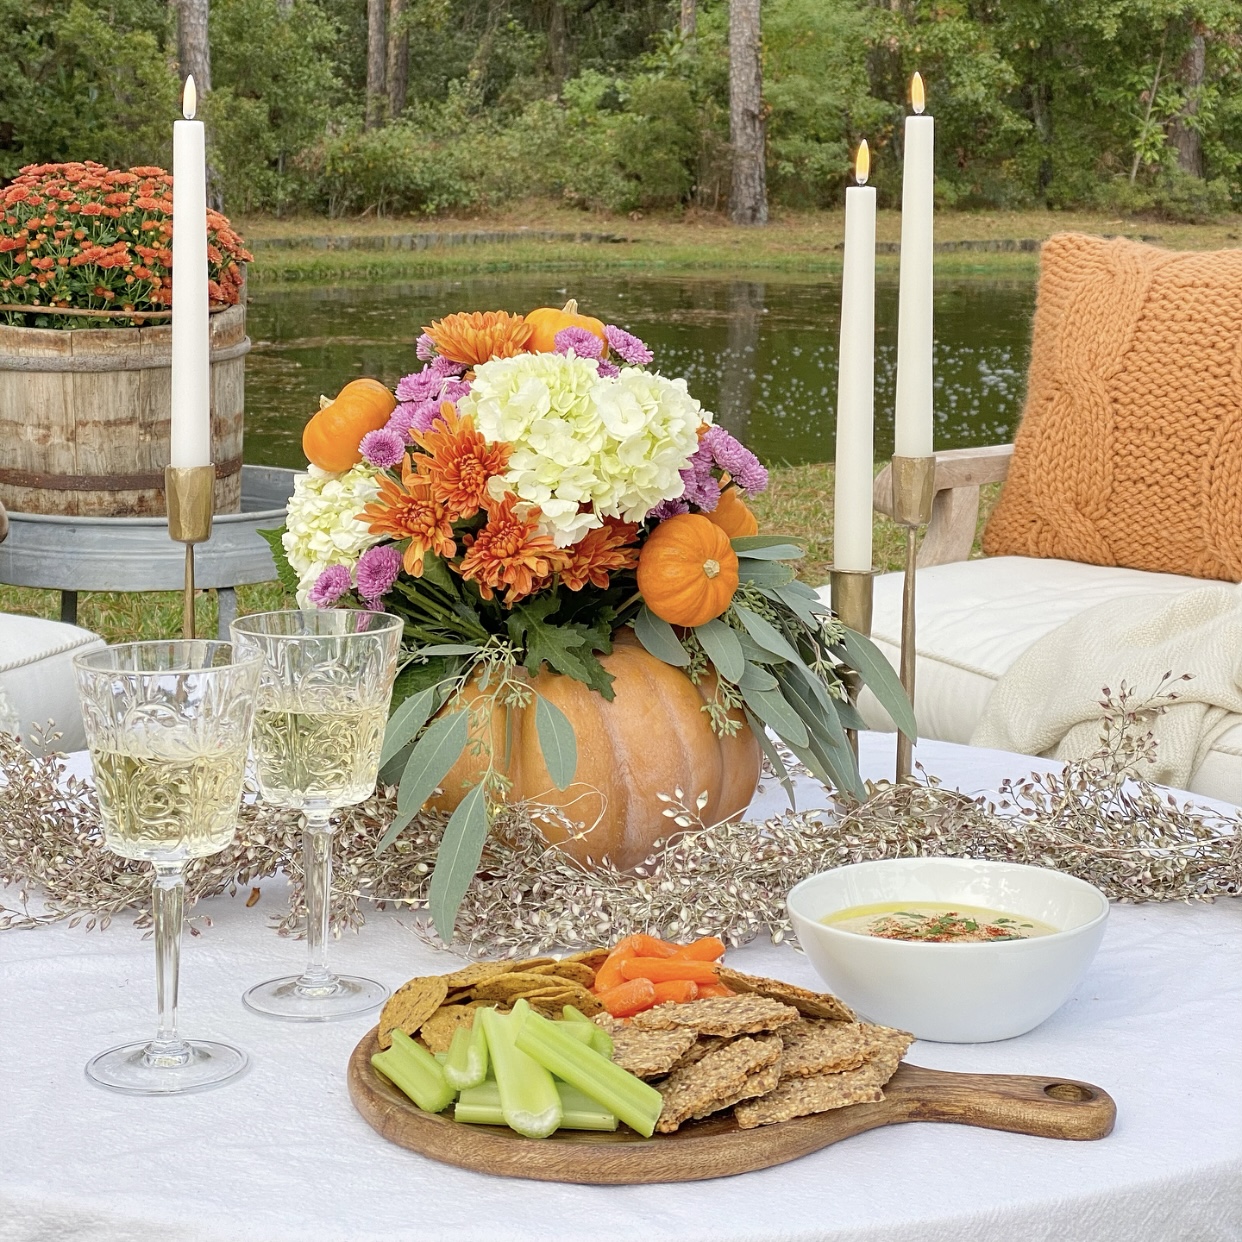 Fall floral arrangement in a hallowed out pumpkin, candles, wine, and white bean hummus on the tablea. In nthe background is a pond.